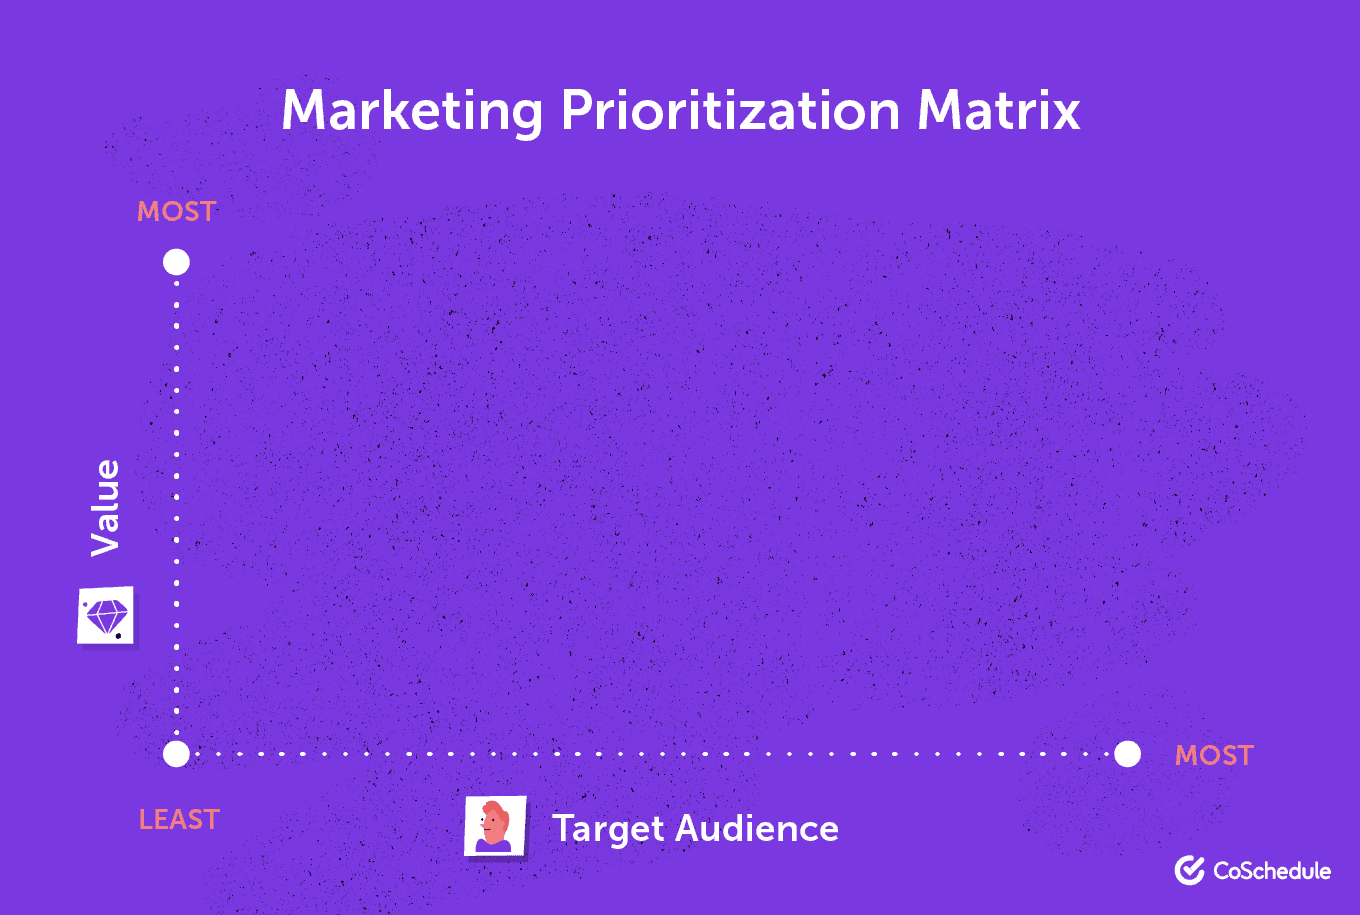 Another blank project matrix with value and target audience on each axis